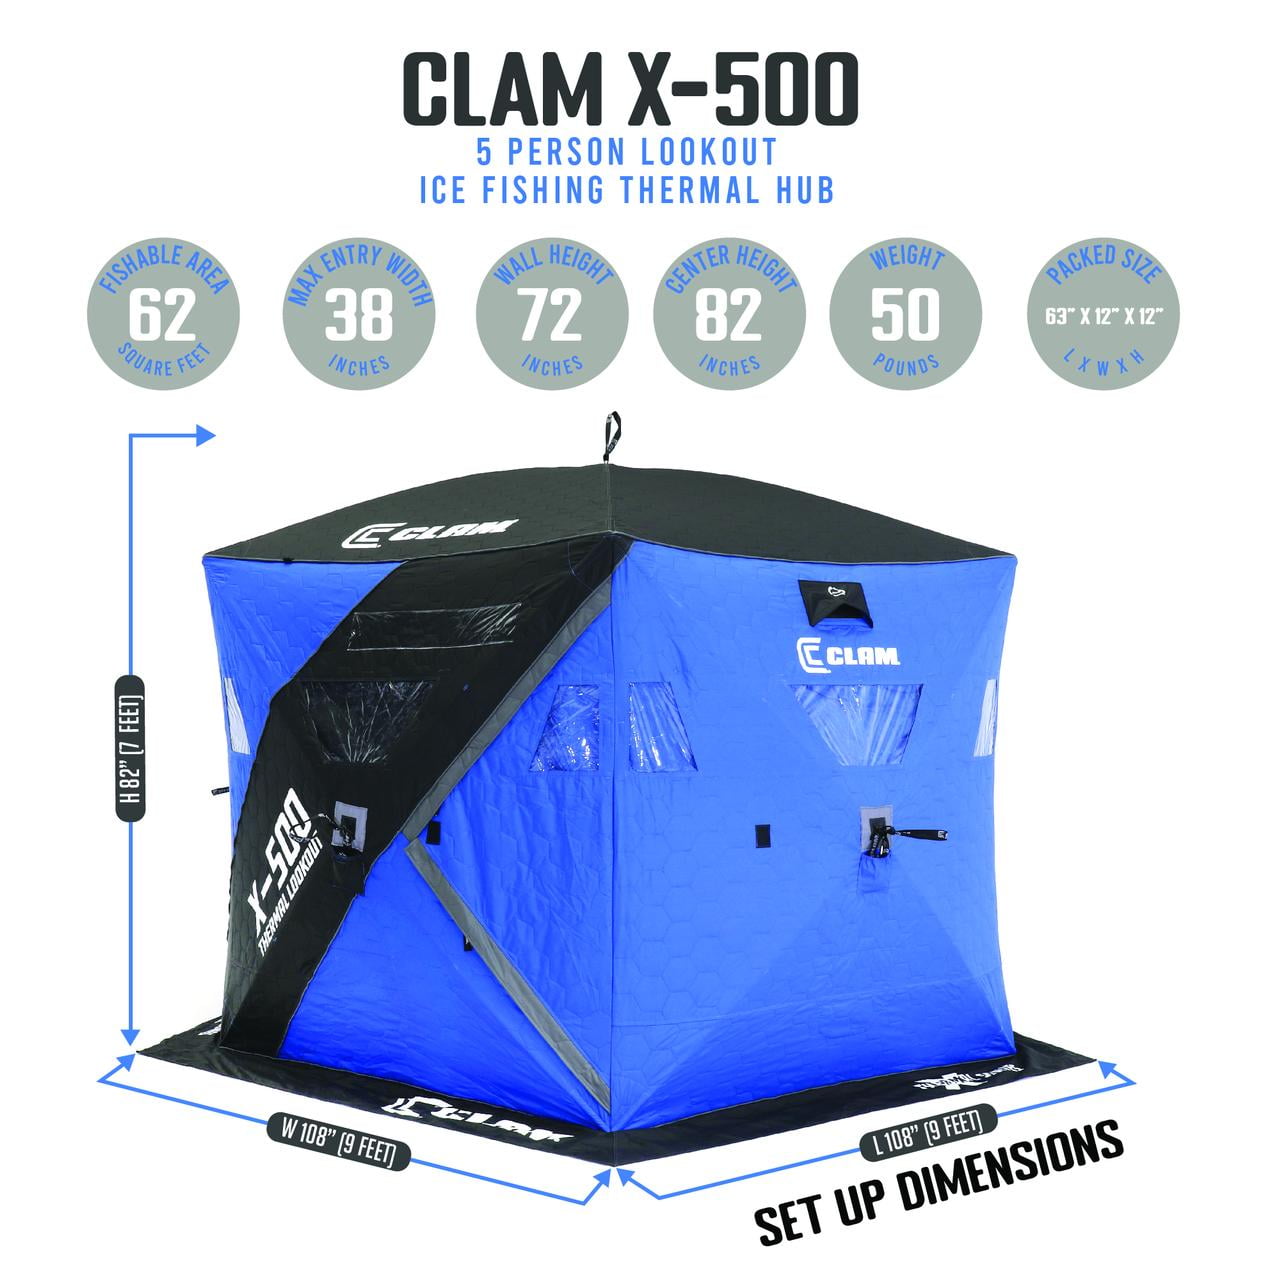 CLAM X-400 Portable 4-6 Person 8 Ft Pop Up Ice Fishing Thermal Hub